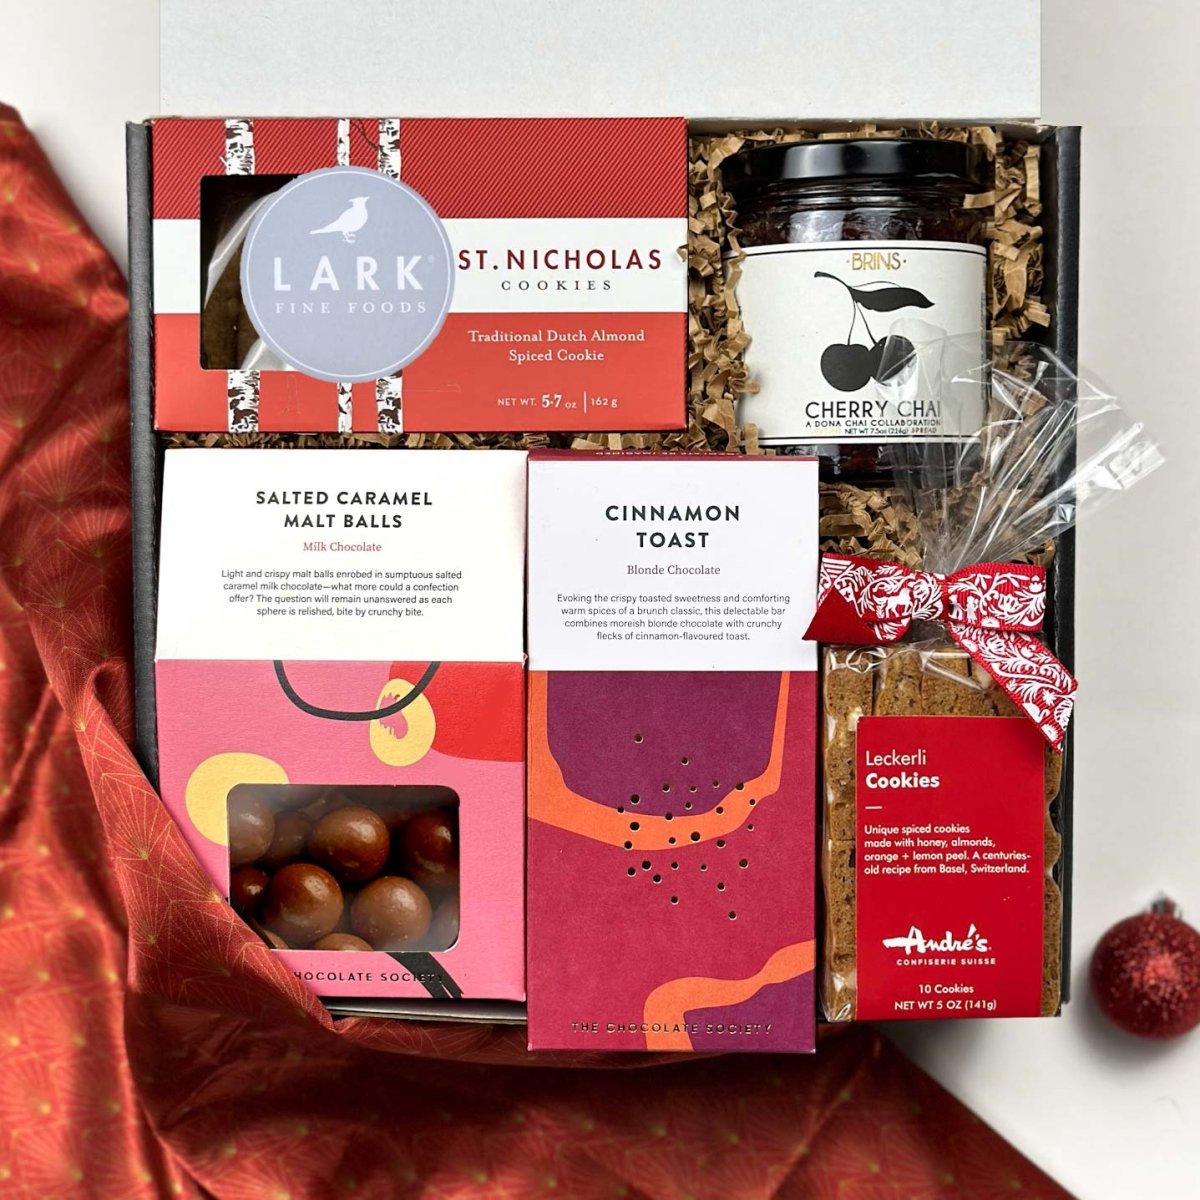 kadoo holiday cheers gift box with chocolate, cookies, jam, and more. Wrapped in reusable Furoshiki fabric.